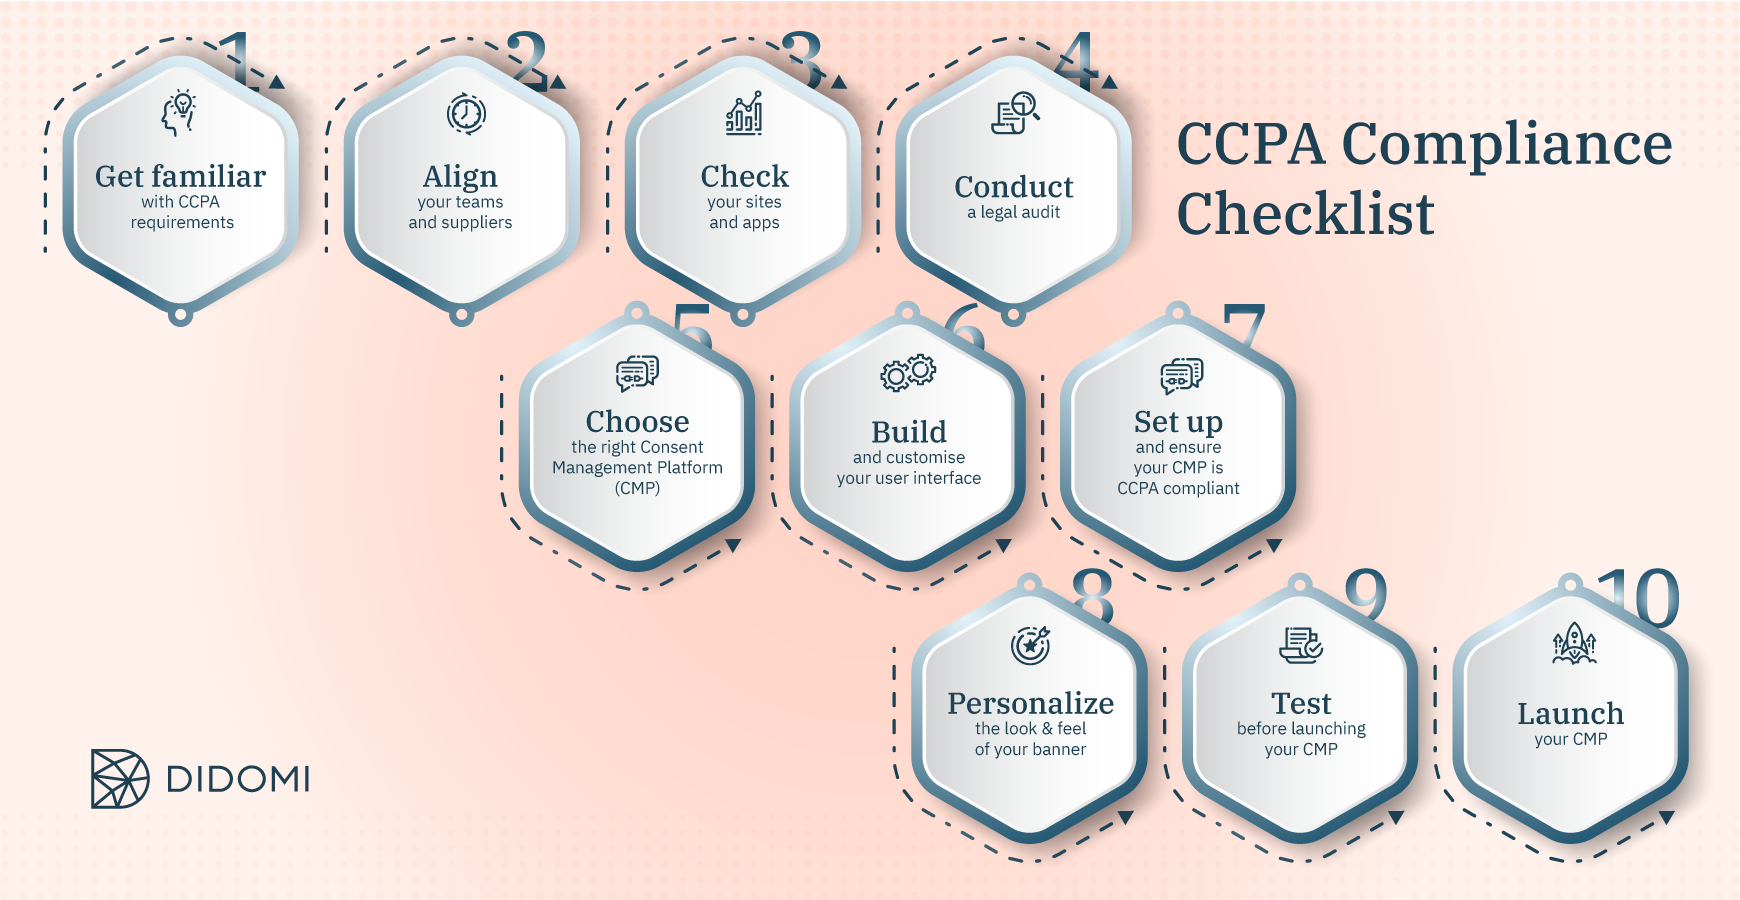 CCPA compliance Checklist: All the requirements you need to know